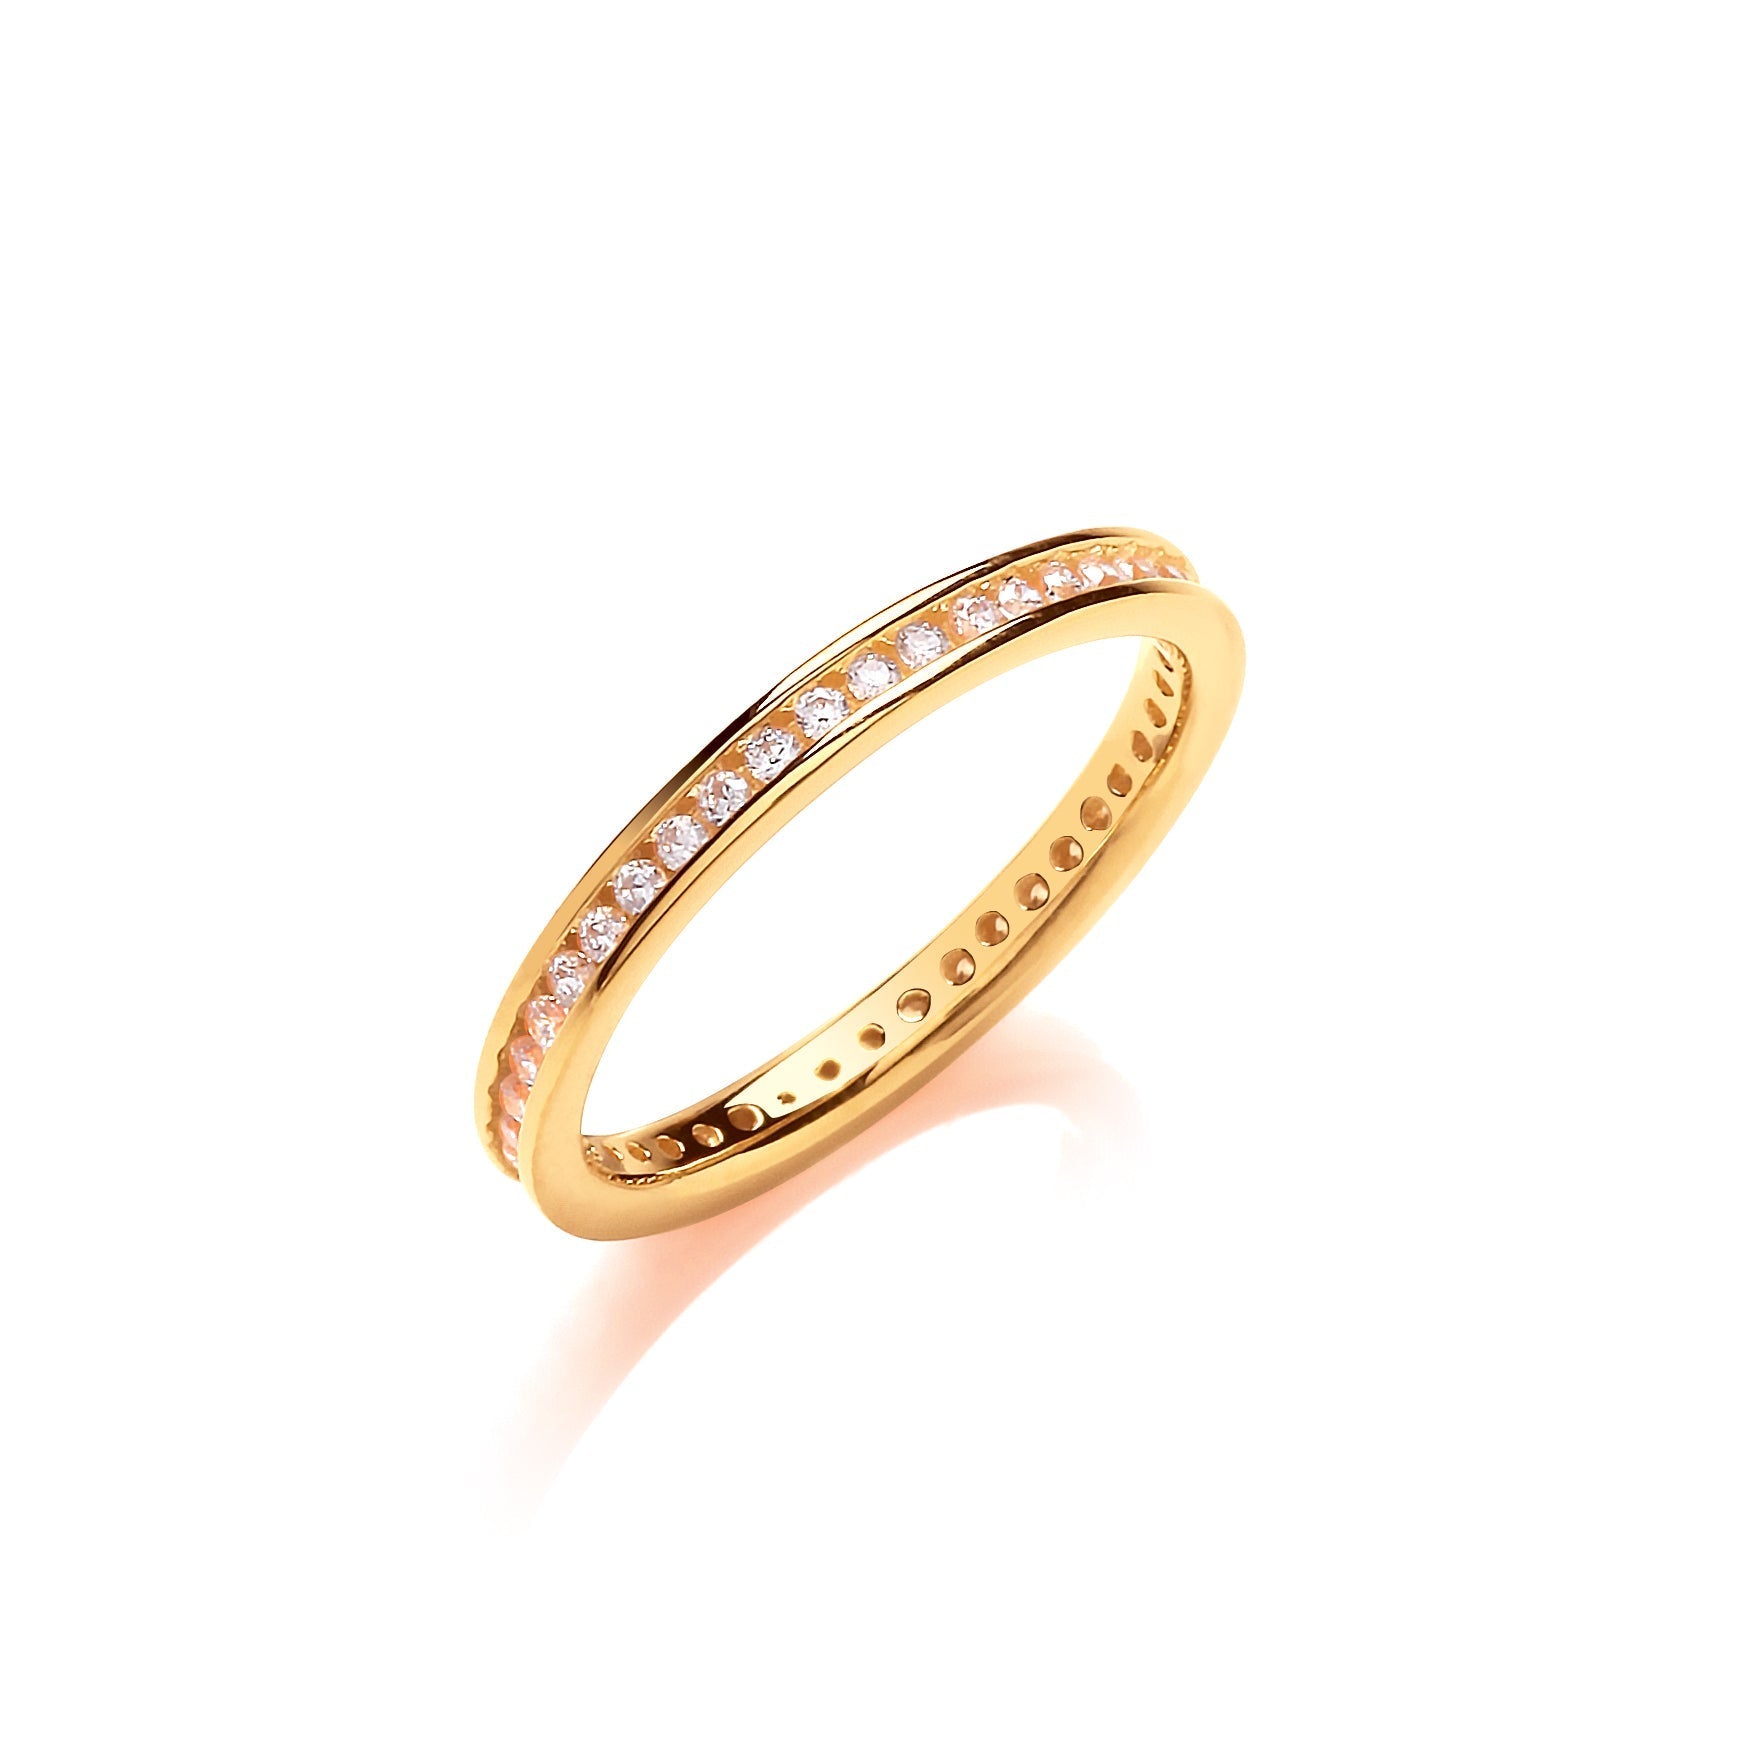 2mm, 3mm and 4mm Channel Set Full Eternity Wedding Band Ring Seasah